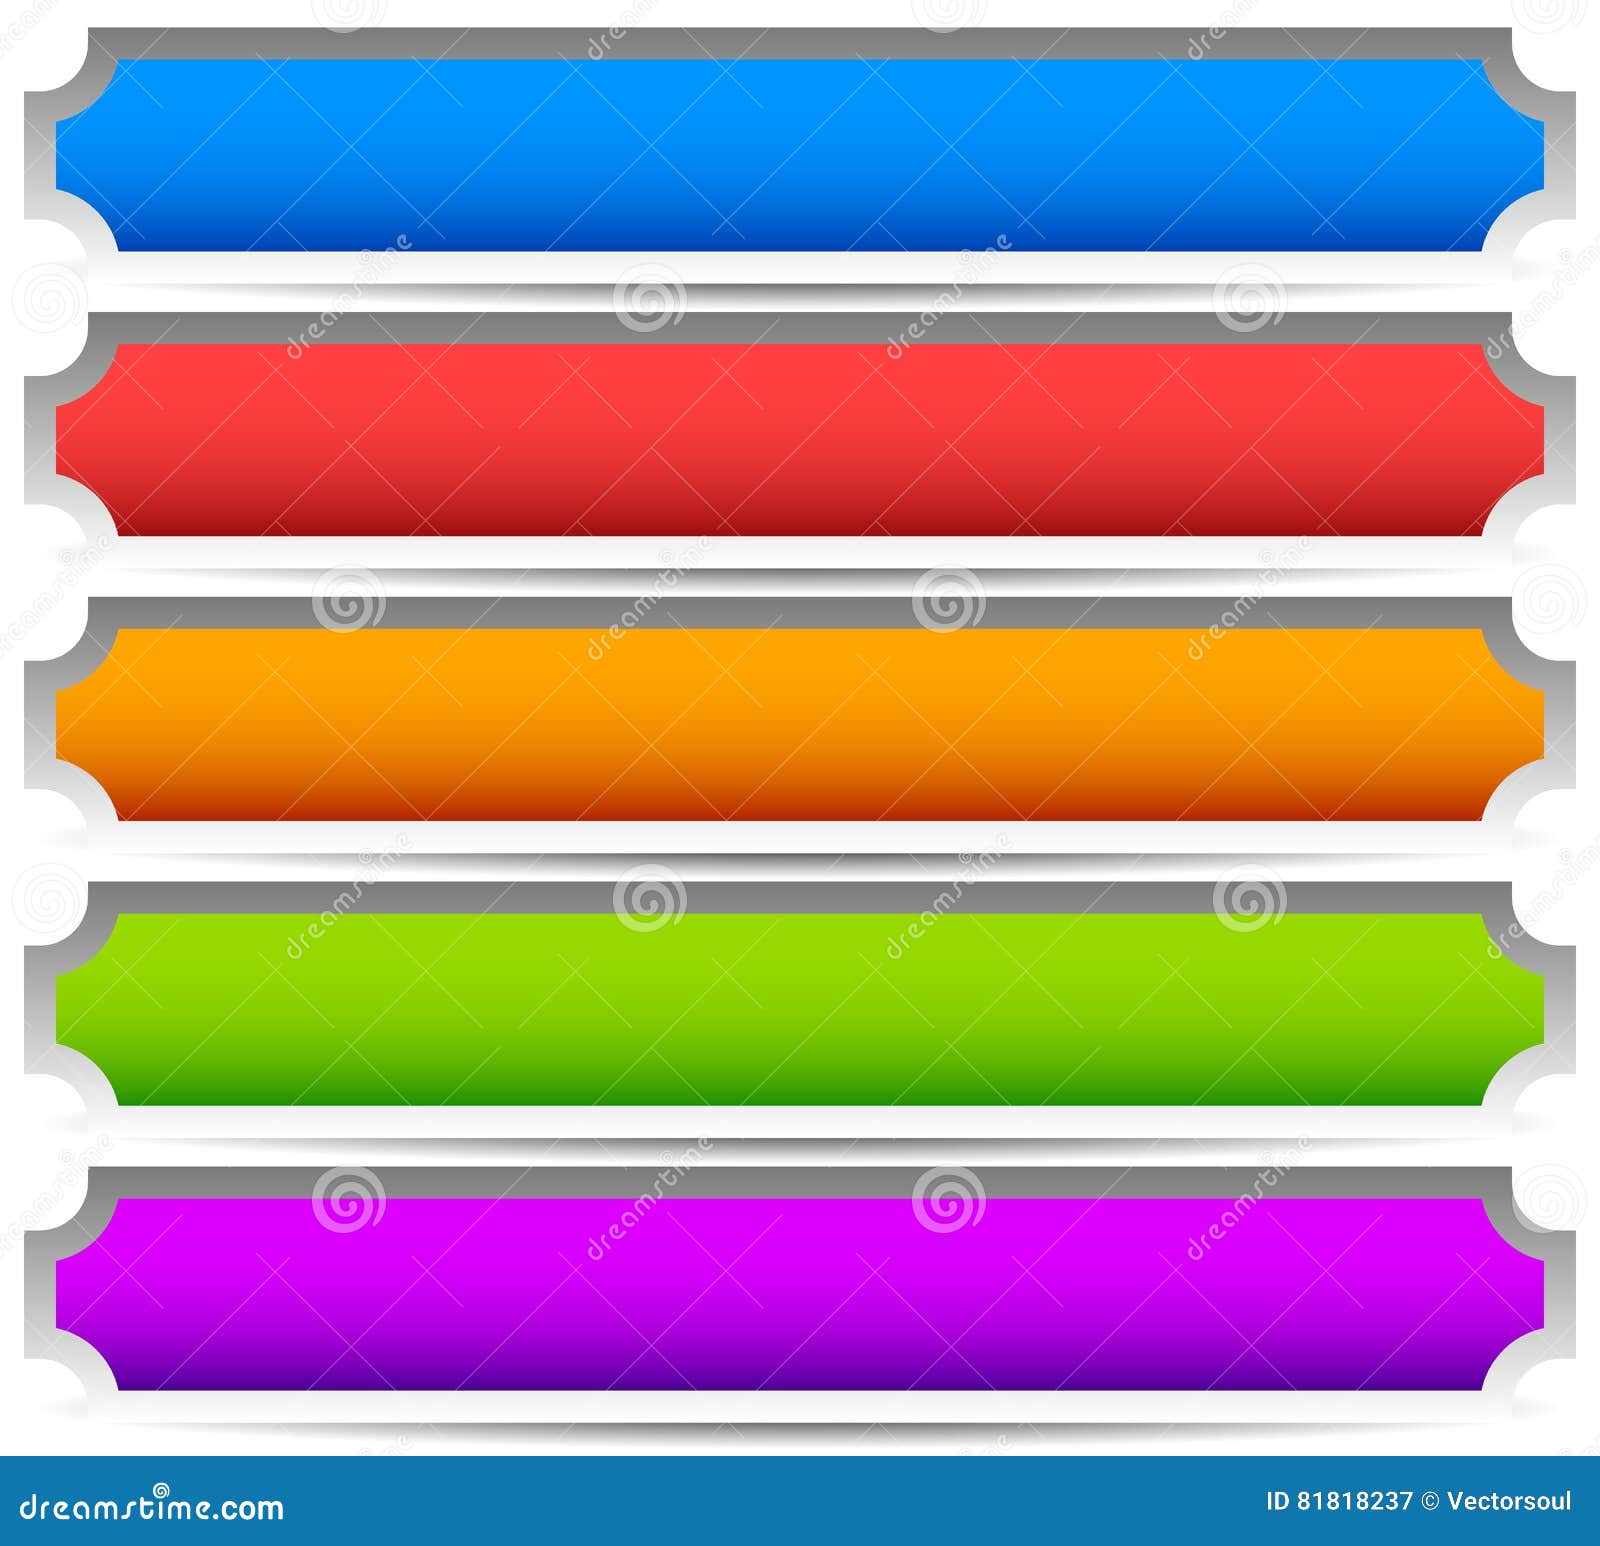 5 Colorful Button, Banner Backgrounds - Set of Rectangular Button ...